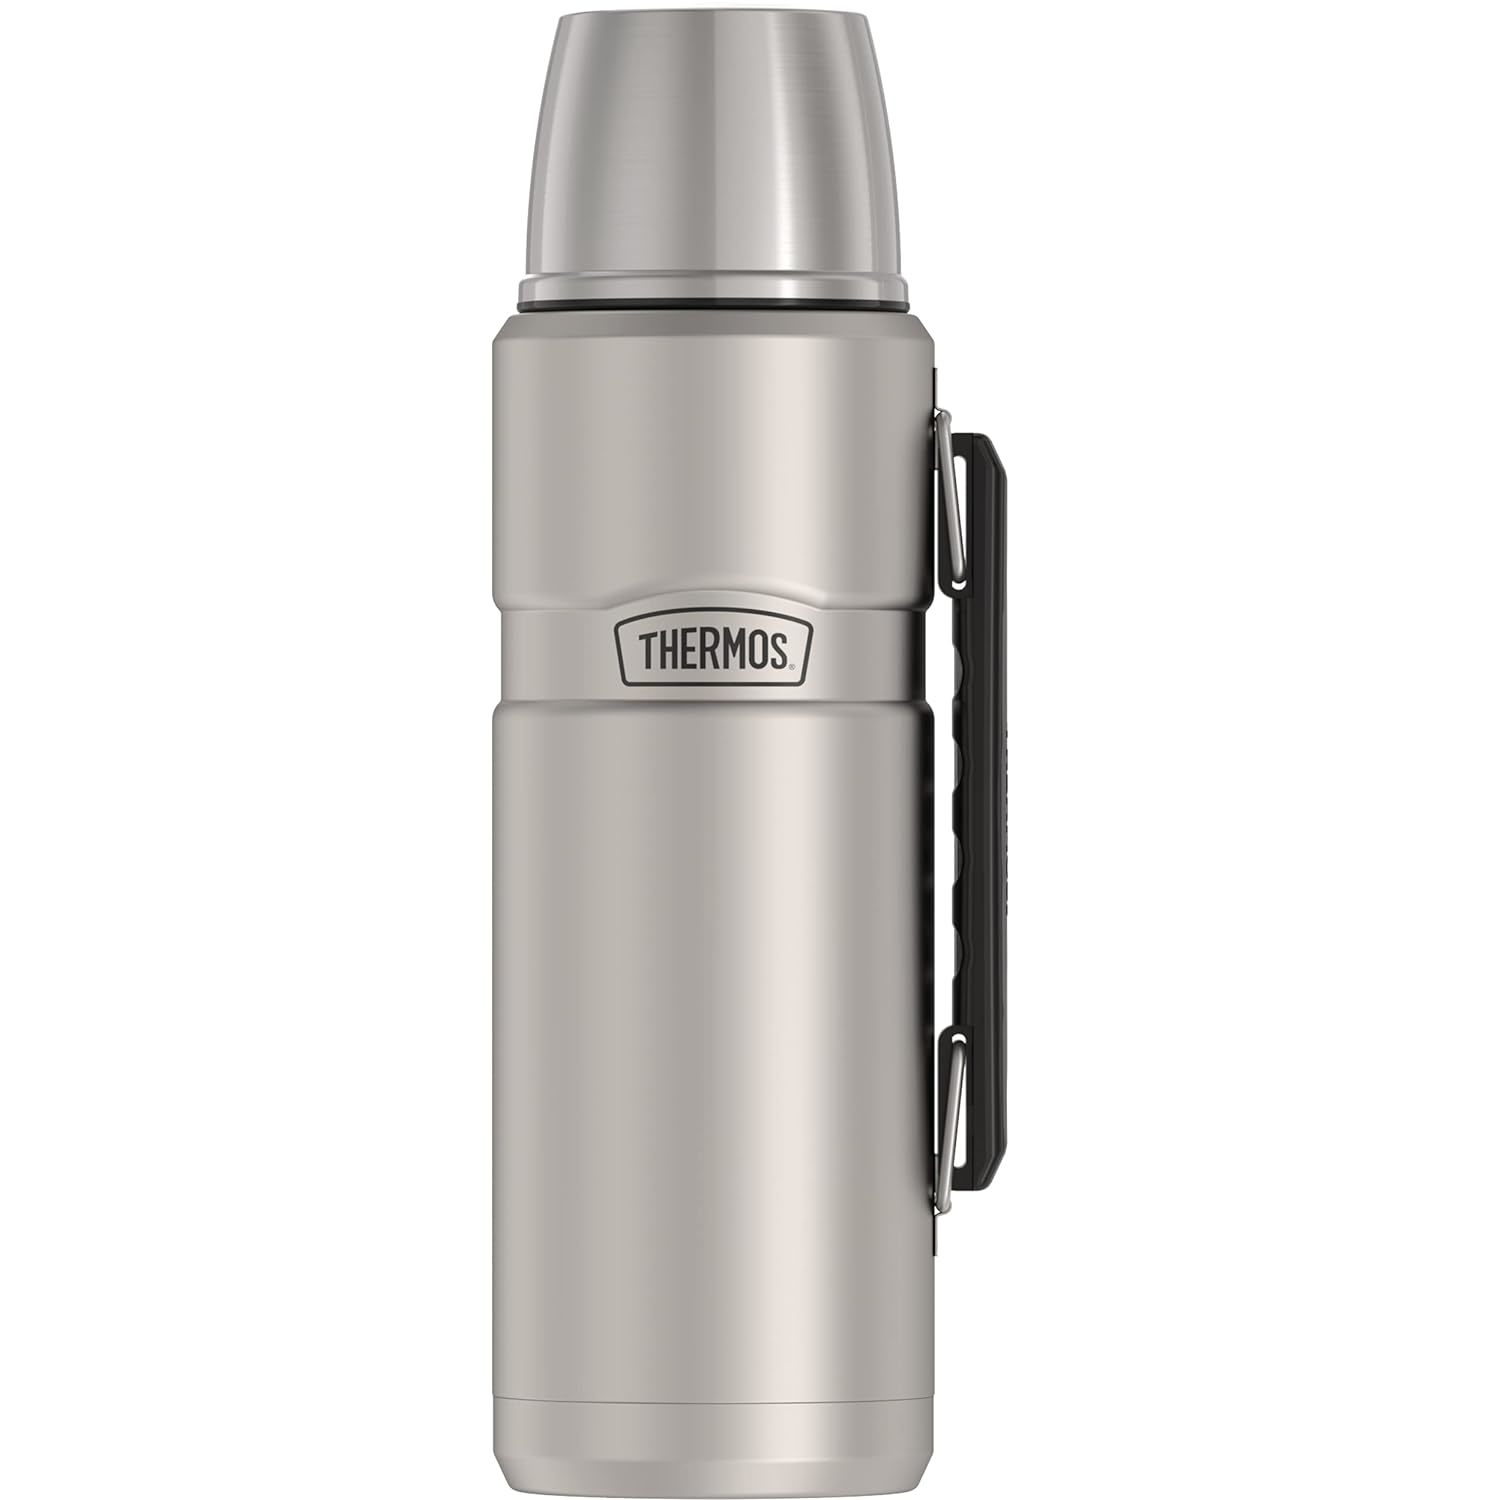 THERMOS Stainless King Vacuum-Insulated Beverage Bottle, 68 Ounce, Matte Steel - $82.99